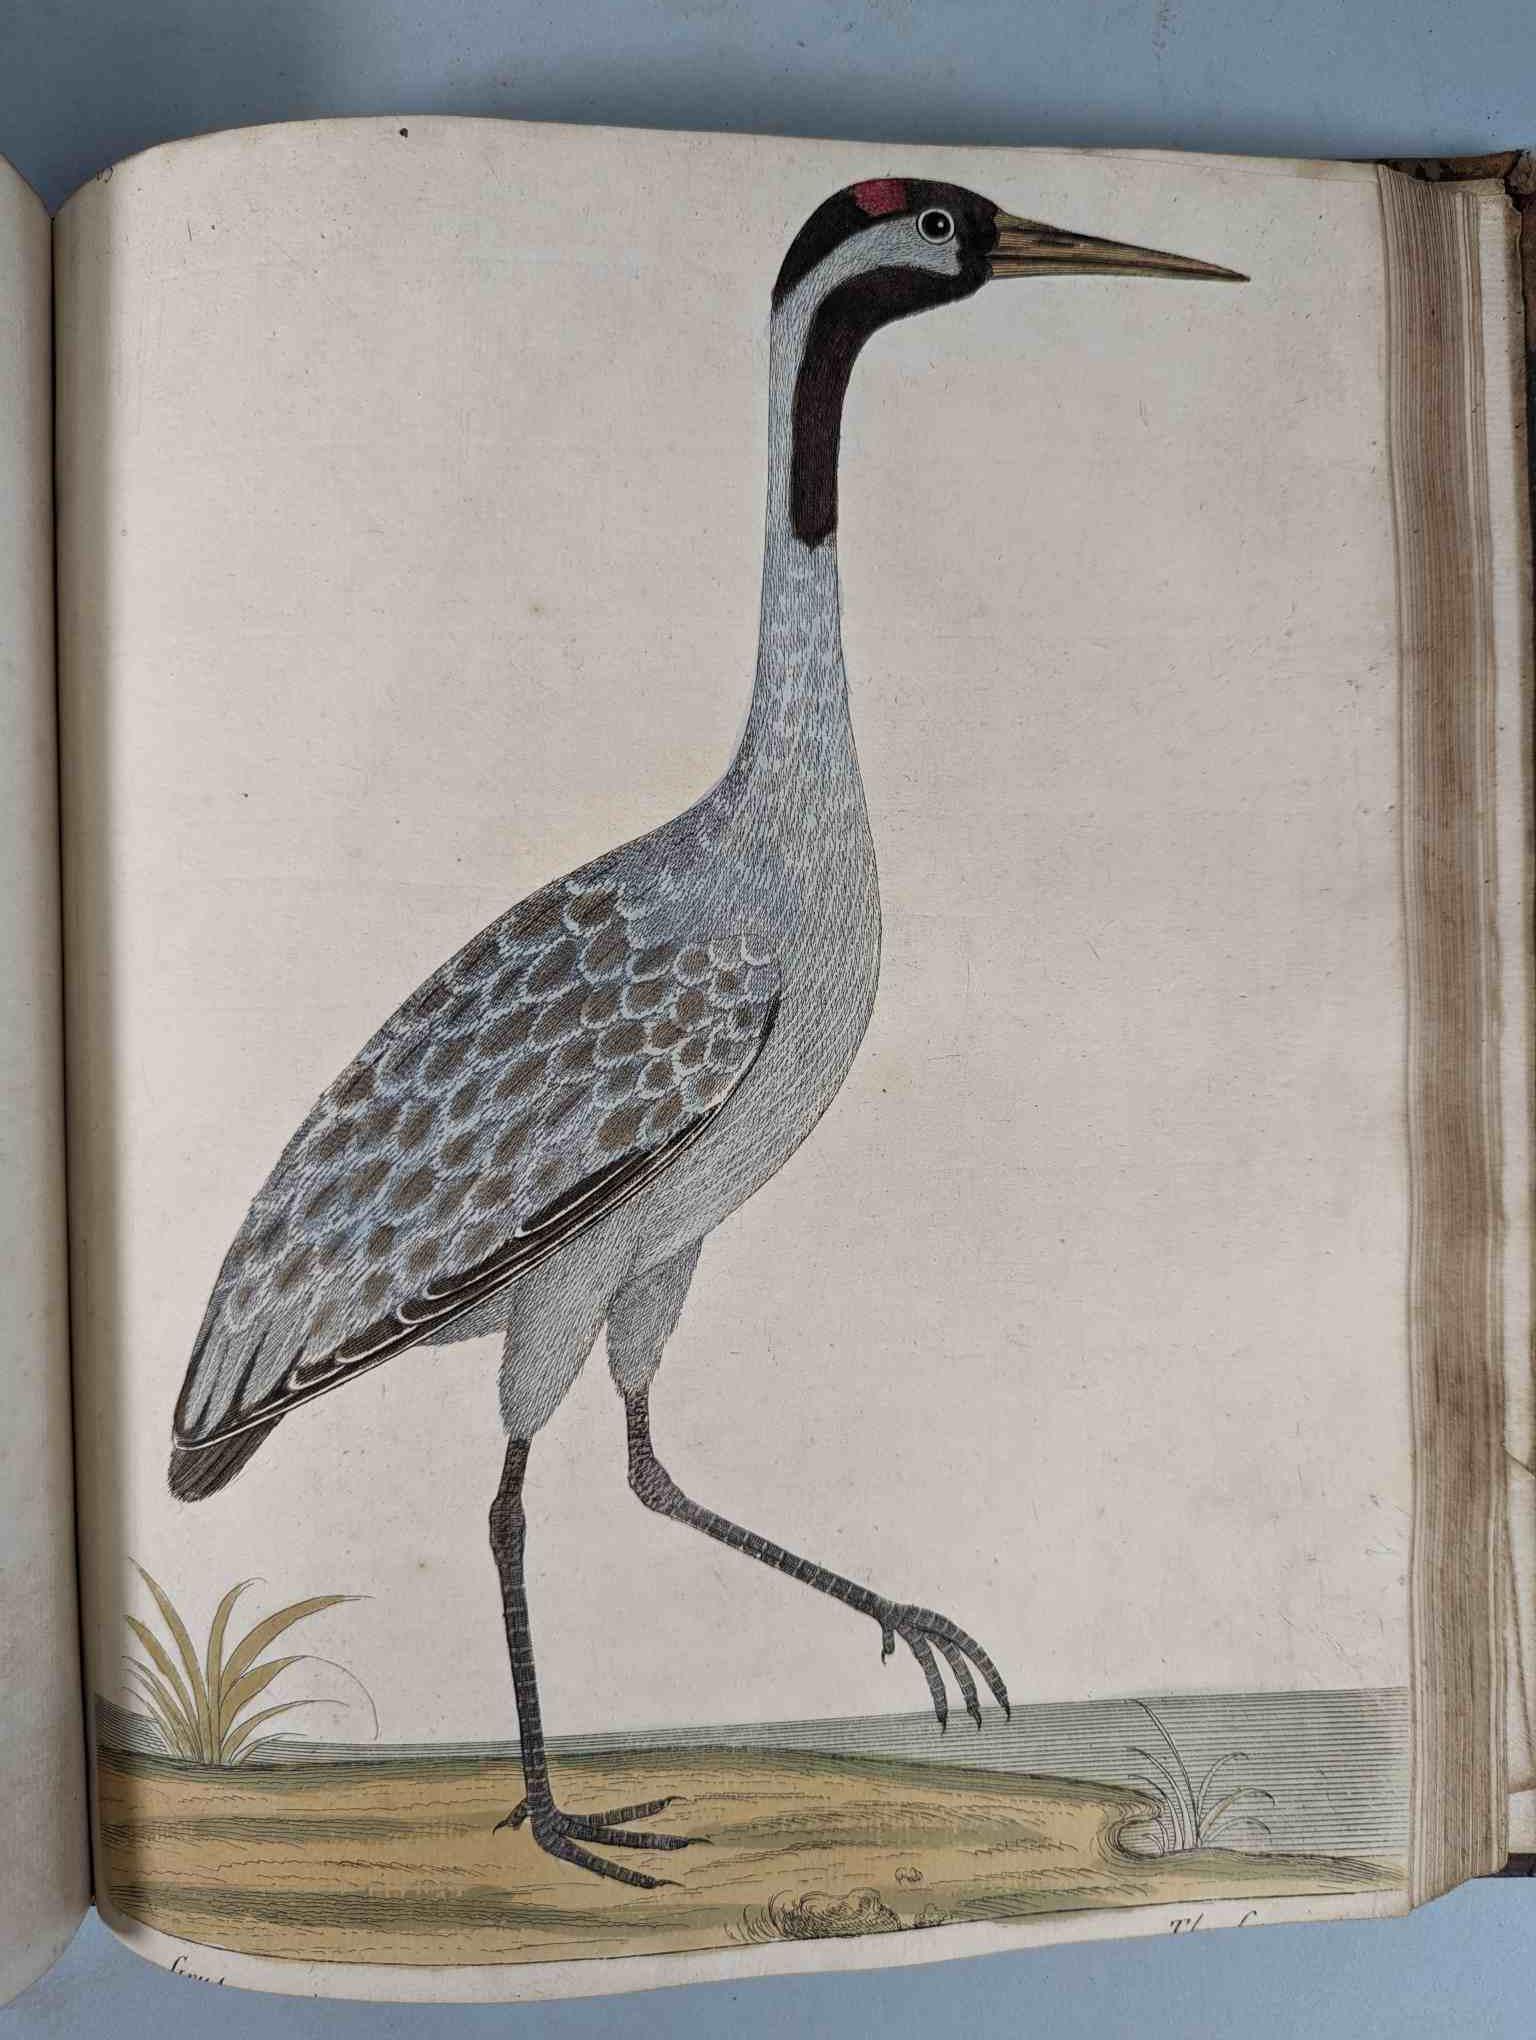 ALBIN, Eleazar. A Natural History of Birds, to which are added, Notes and Observations by W. - Image 169 of 208